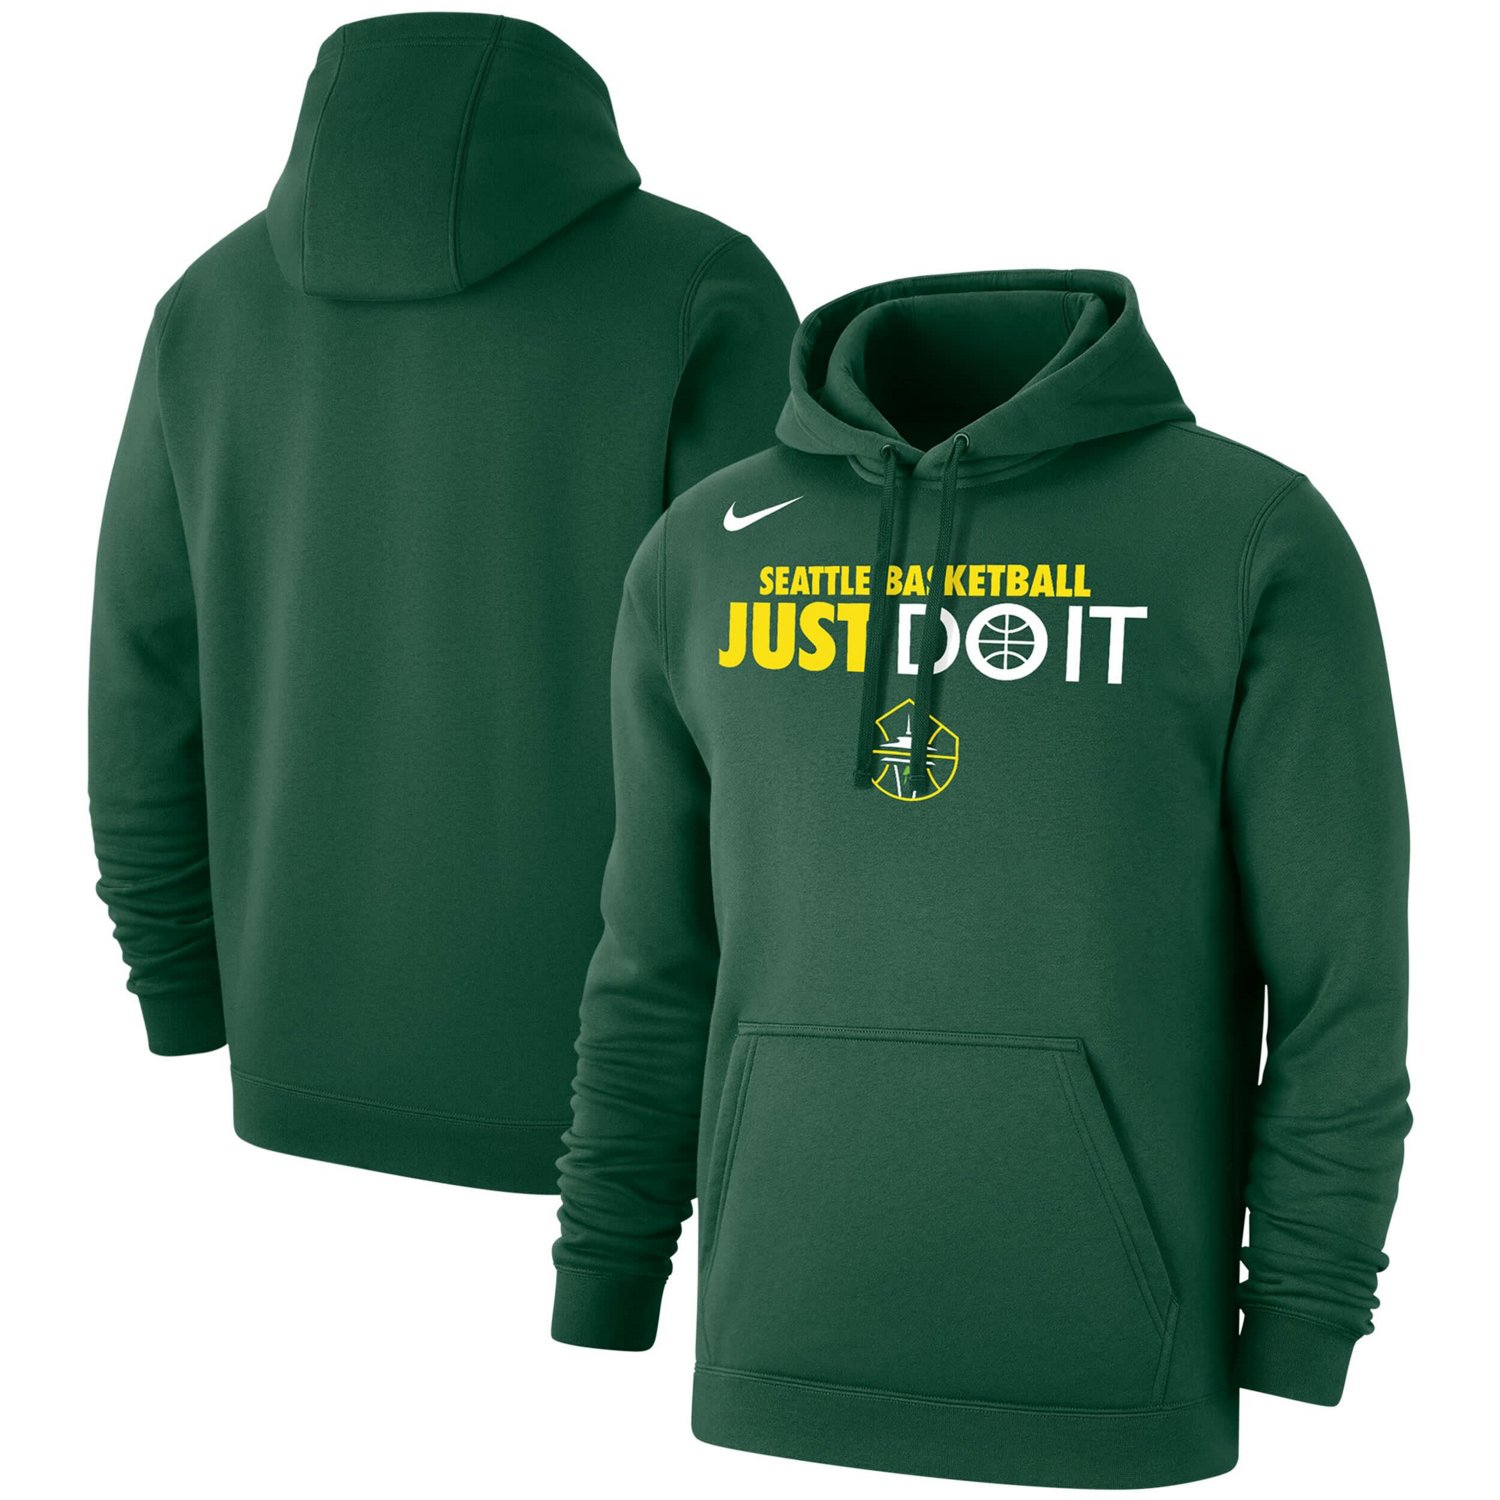 Unisex Nike Seattle Storm Just Do It Club Pullover Hoodie                                                                        - view number 1 selected